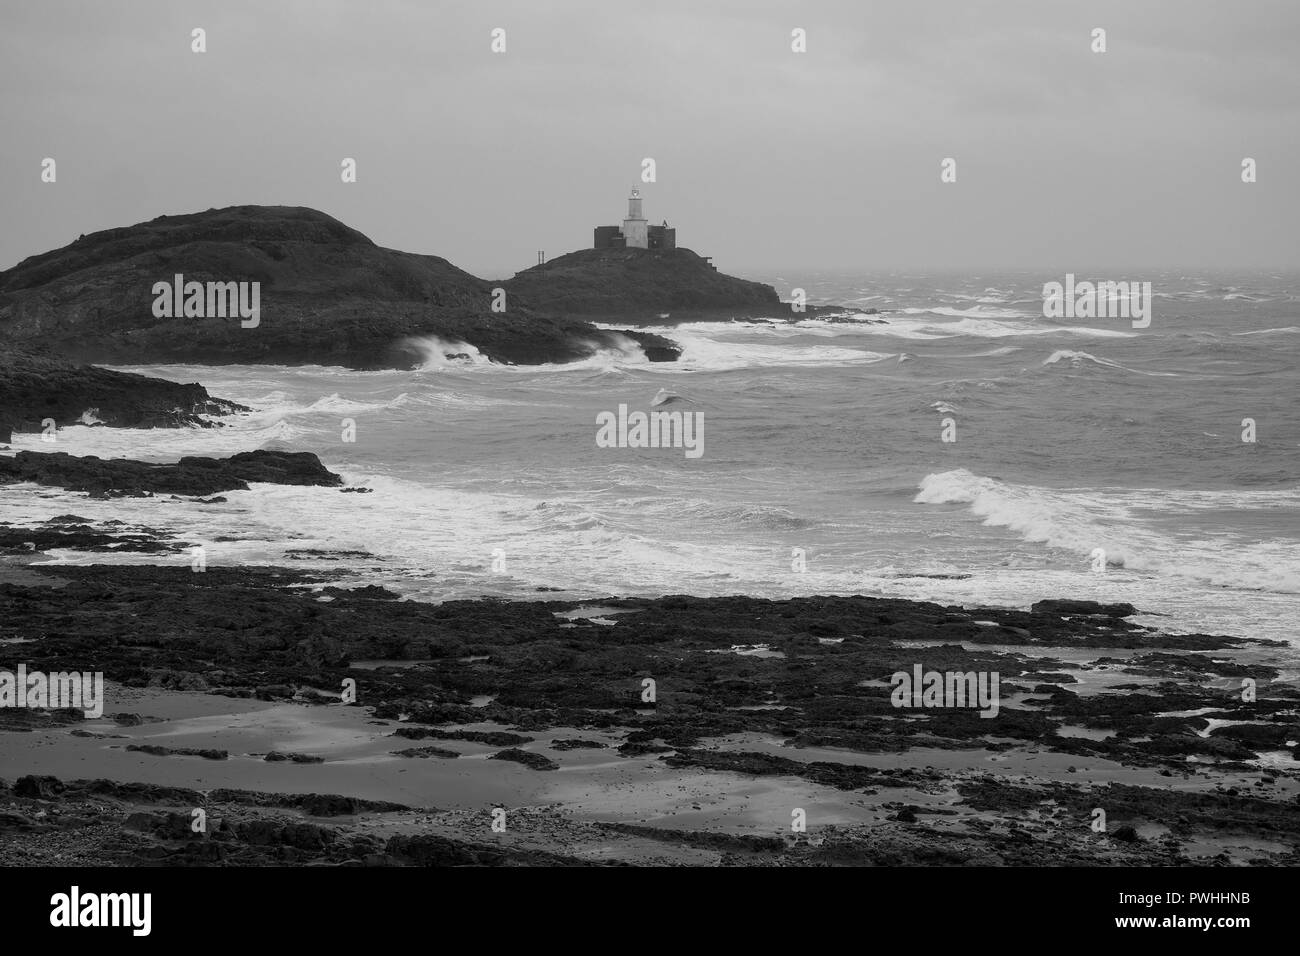 Mumbles Lighthouse lit up on a stormy day overlooking Bracelet Bay, the Gower Peninsula near Swansea, South Wales Stock Photo